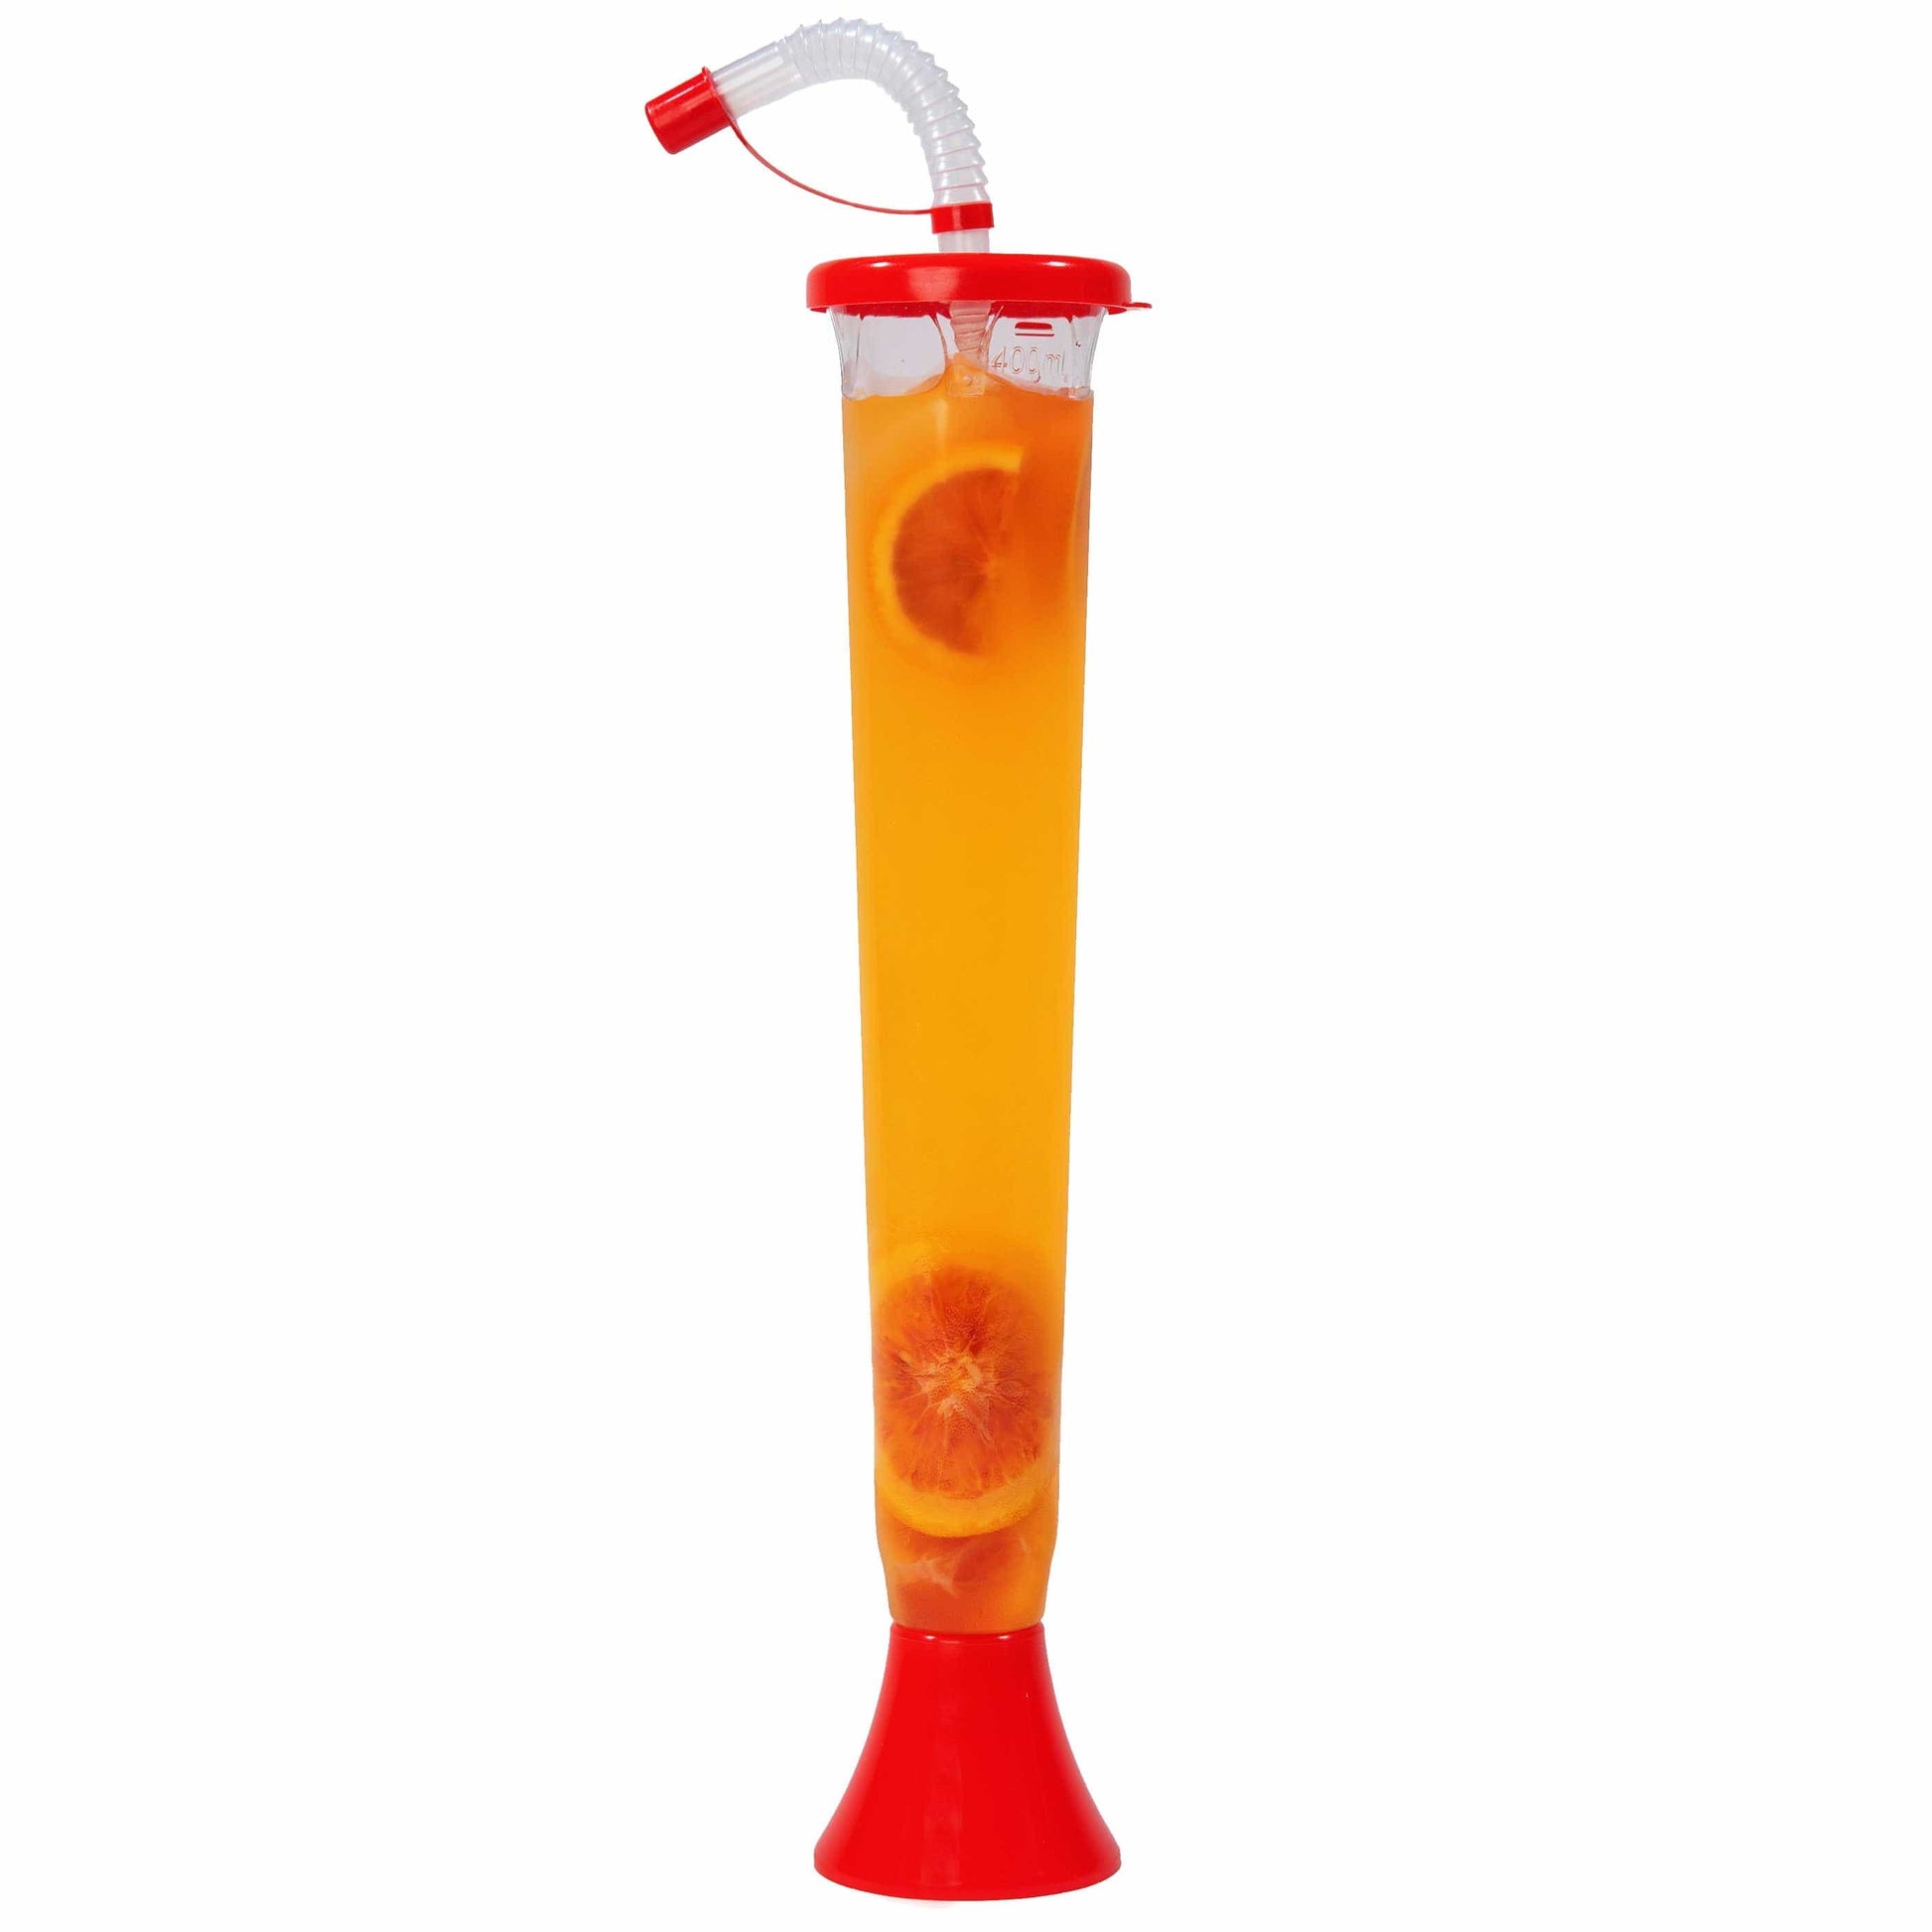 Sweet World USA Yard Cups Yard Cups Party 12-Pack (14oz/400ml) cups with lids and straws